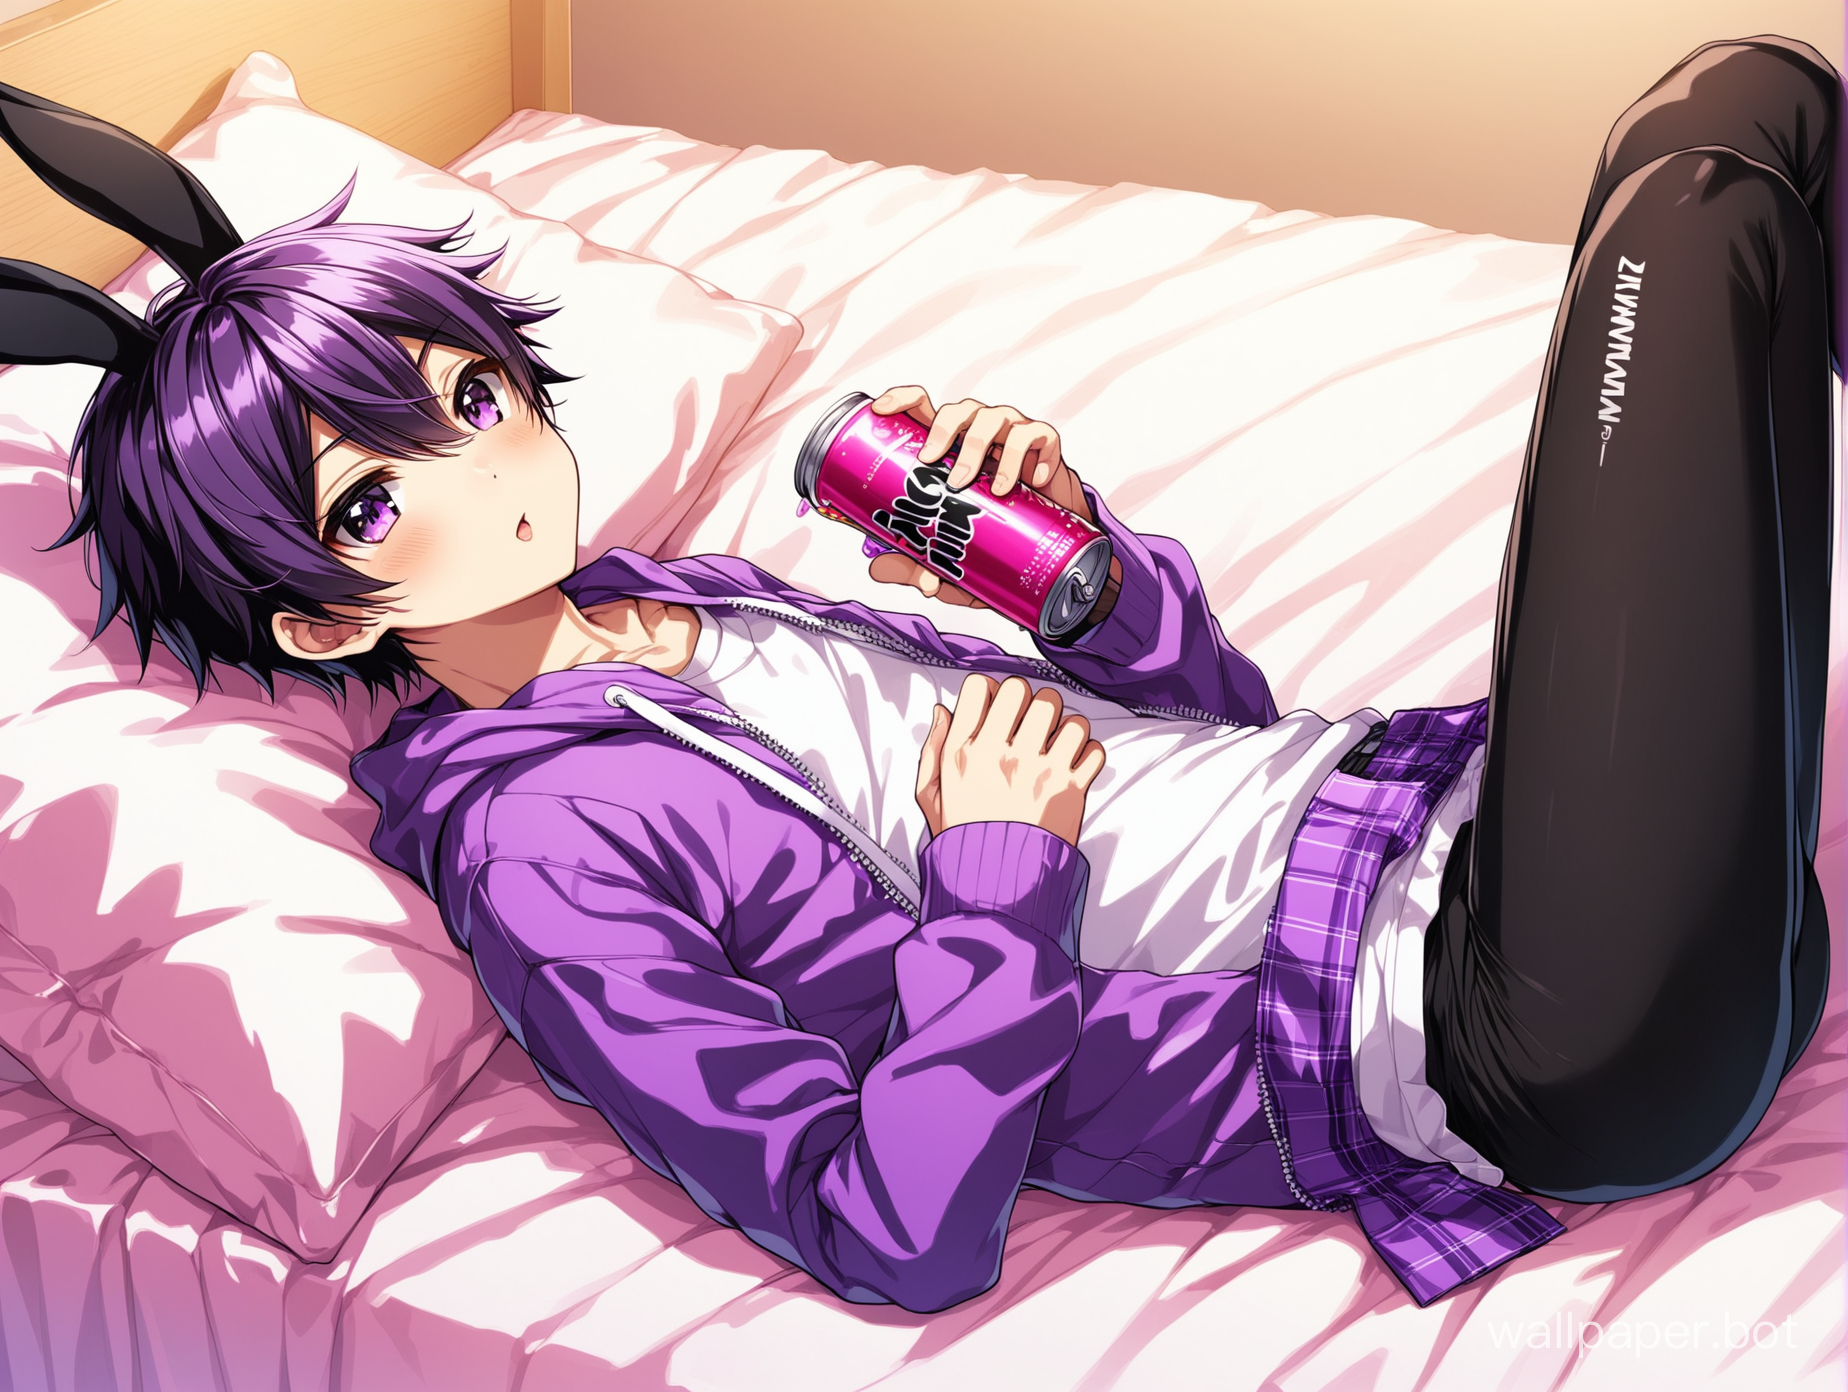 Male Anime Bunny shota kawaii wearing a skirt and leggings, laying on a bed, drinking an energy drink. Pink, White, Purple, Black